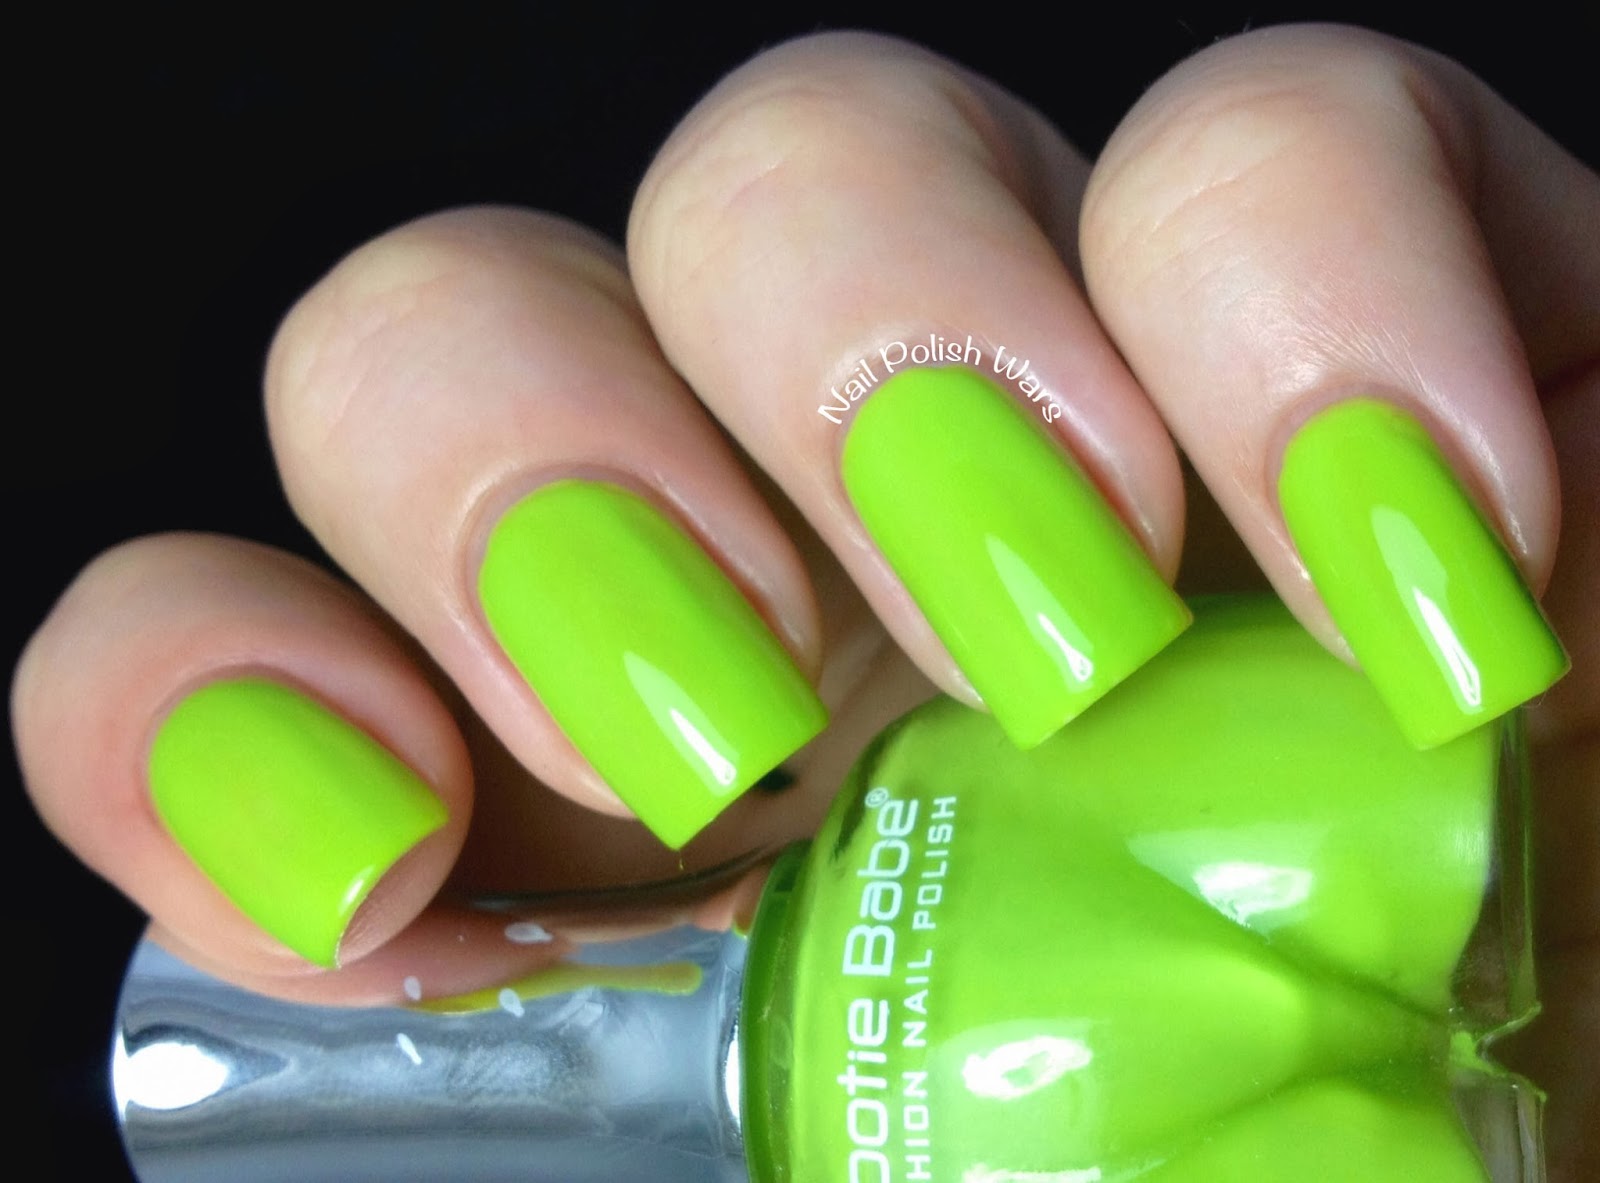 Nail Polish Wars: Bootie Babe Line Favorites Review